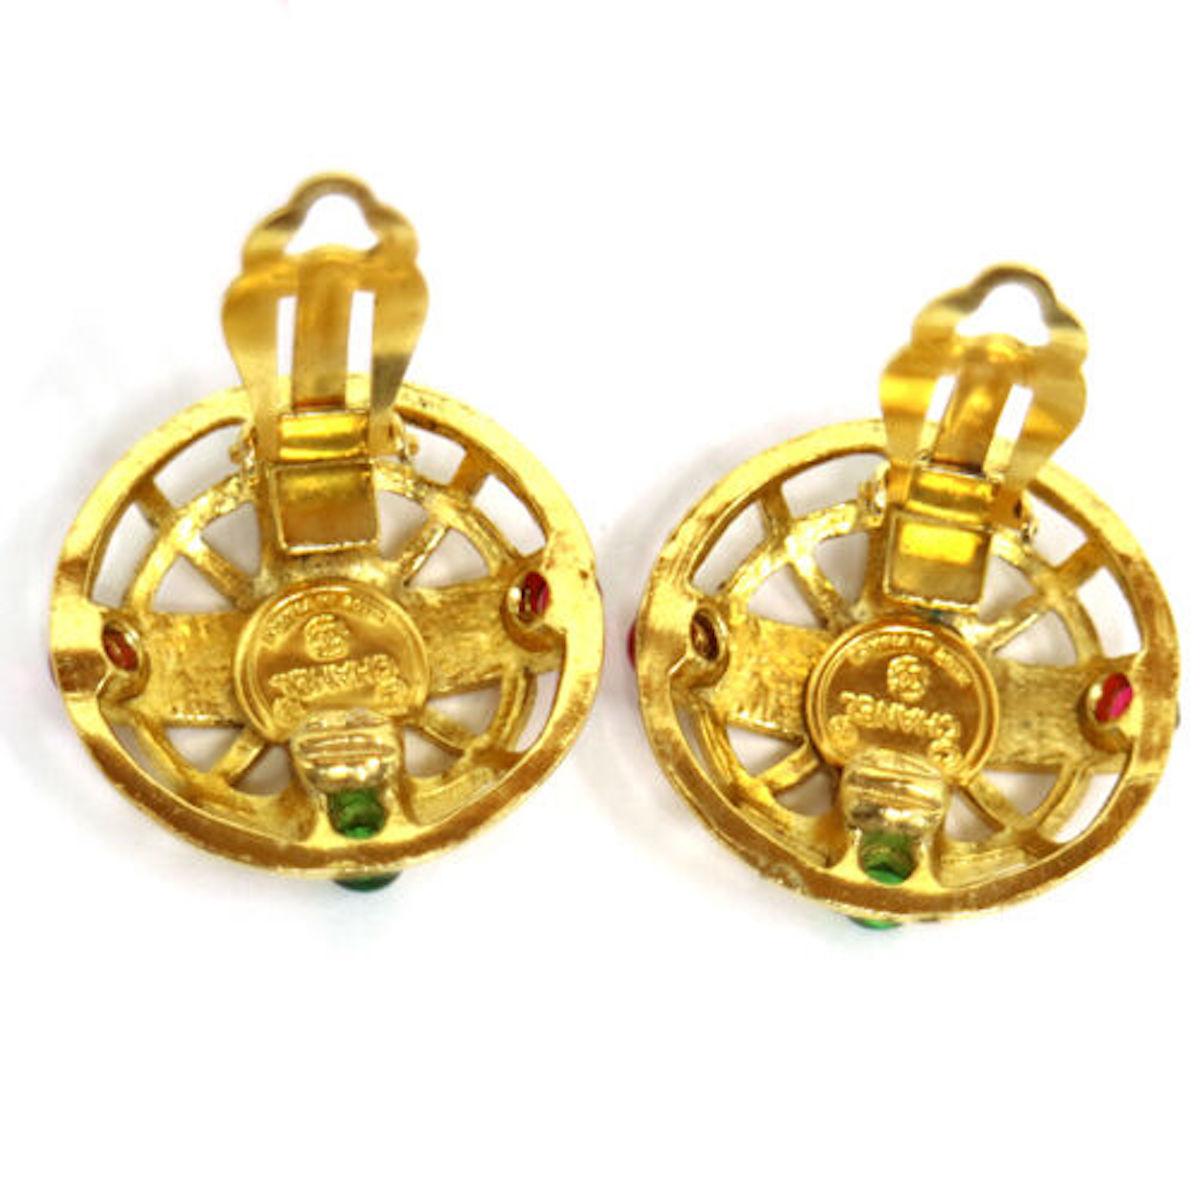 Chanel Gold Green Red Gripoix 'CHANEL' Button Evening Earrings

Metal 
Gripoix
Gold tone
Clip on closure 
Made in France
Diameter 1